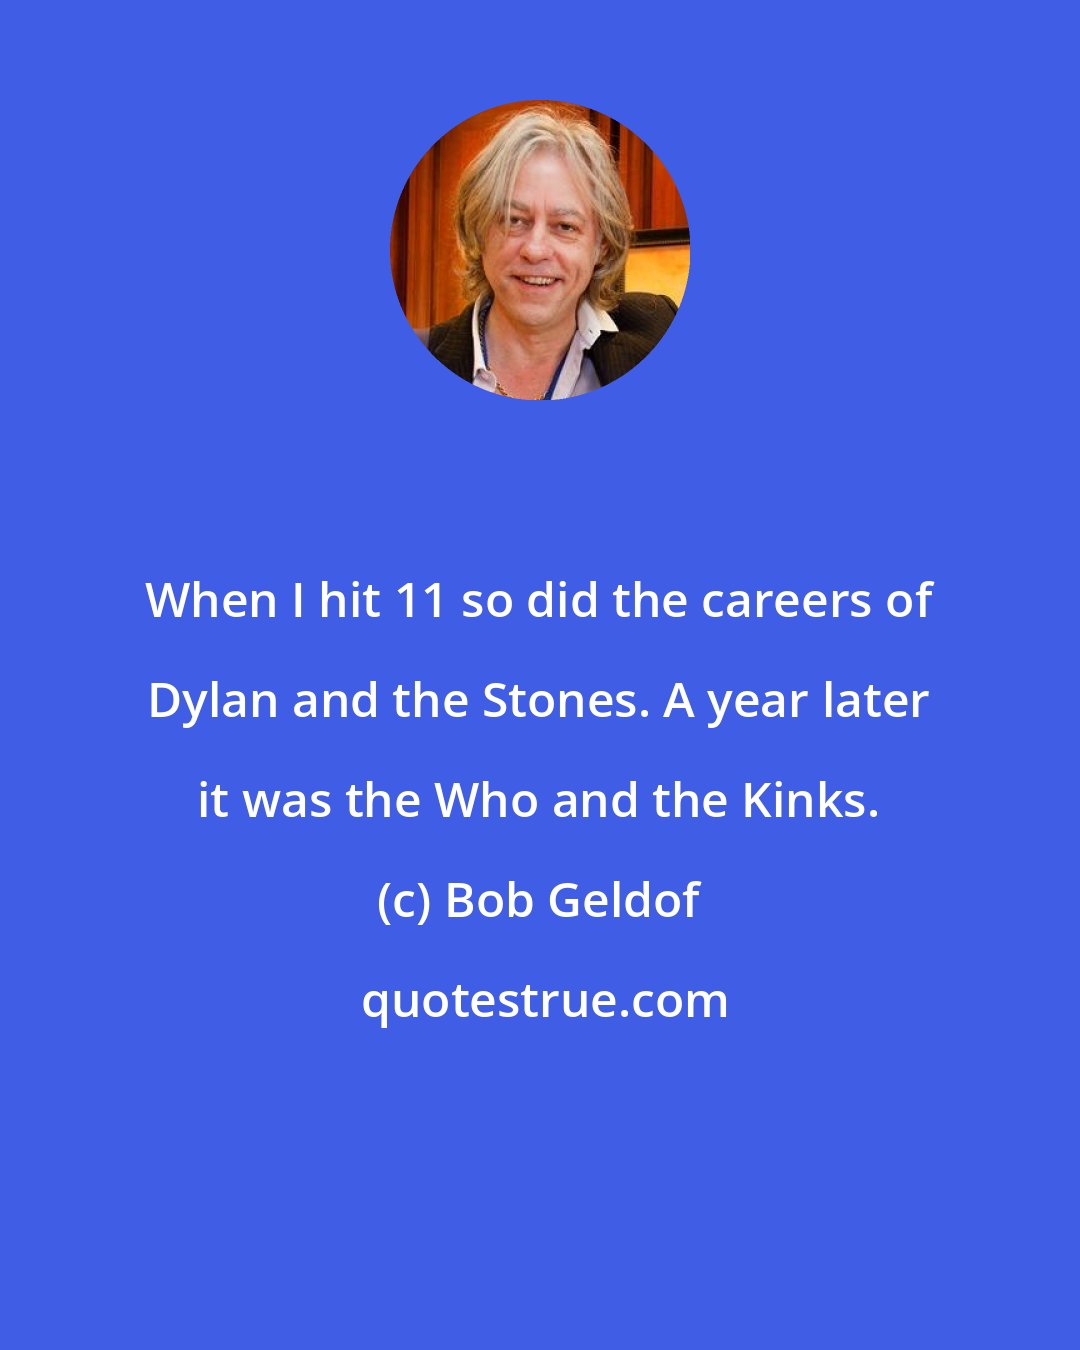 Bob Geldof: When I hit 11 so did the careers of Dylan and the Stones. A year later it was the Who and the Kinks.